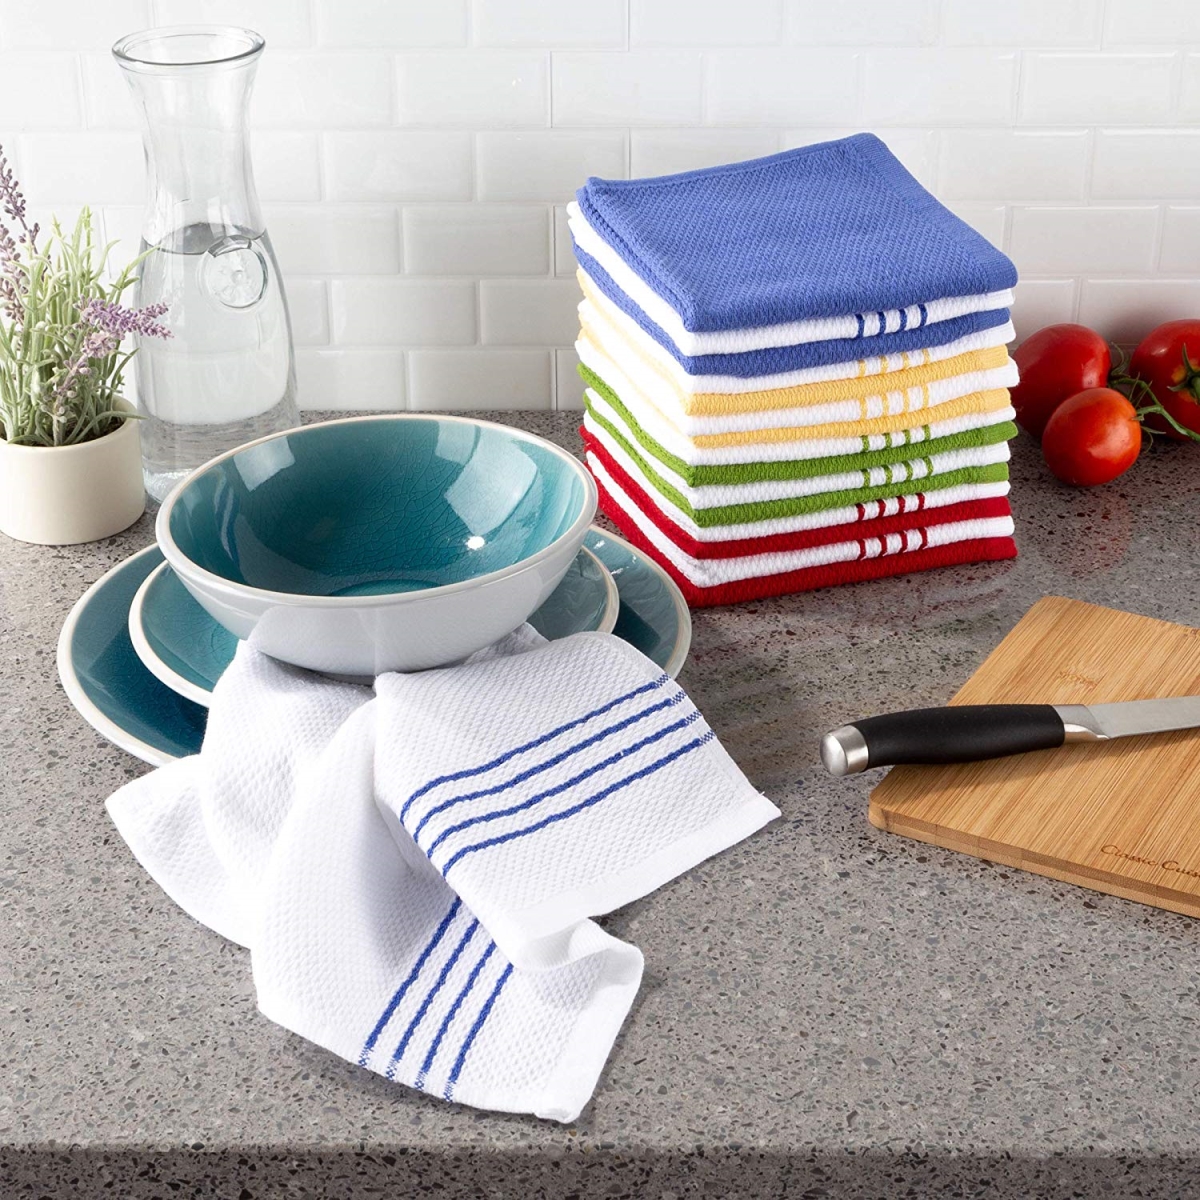 69a-39284 12.5 X 12.5 In. Home Kitchen Dish Cloth, Multi-color - Set Of 16